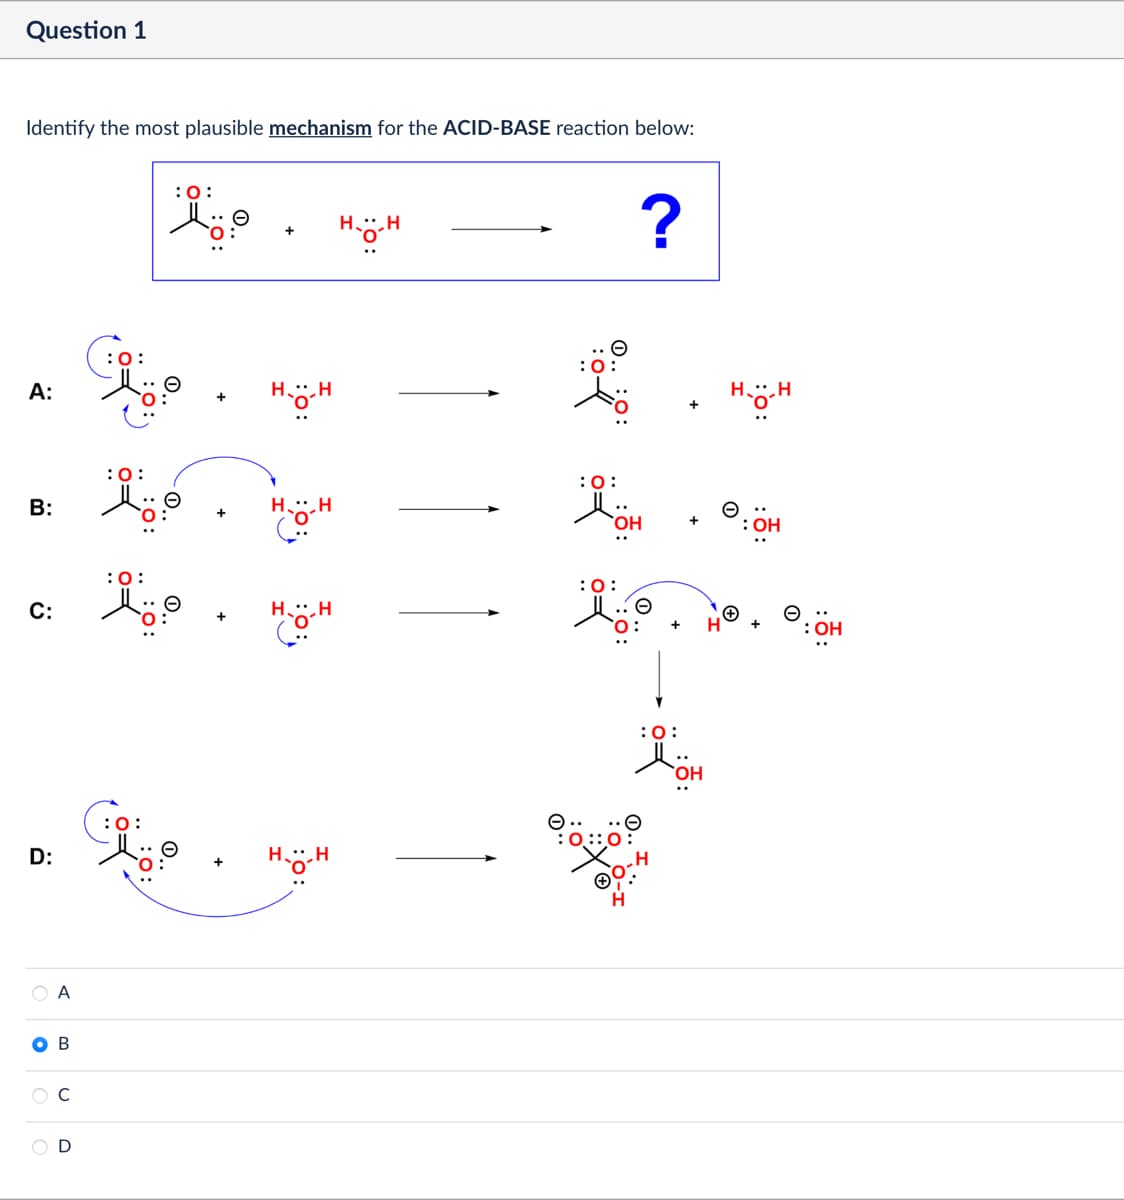 Question 1
Identify the most plausible mechanism for the ACID-BASE reaction below:
:0:
+
Ho
?
A:
:0
H.-H
B:
:0:
C:
: 0:
D:
B
C
:0:
O=
D
O..
HH
HH
فة
:0:
OH
:0:
Θ
+
H.-H
:0:
OH